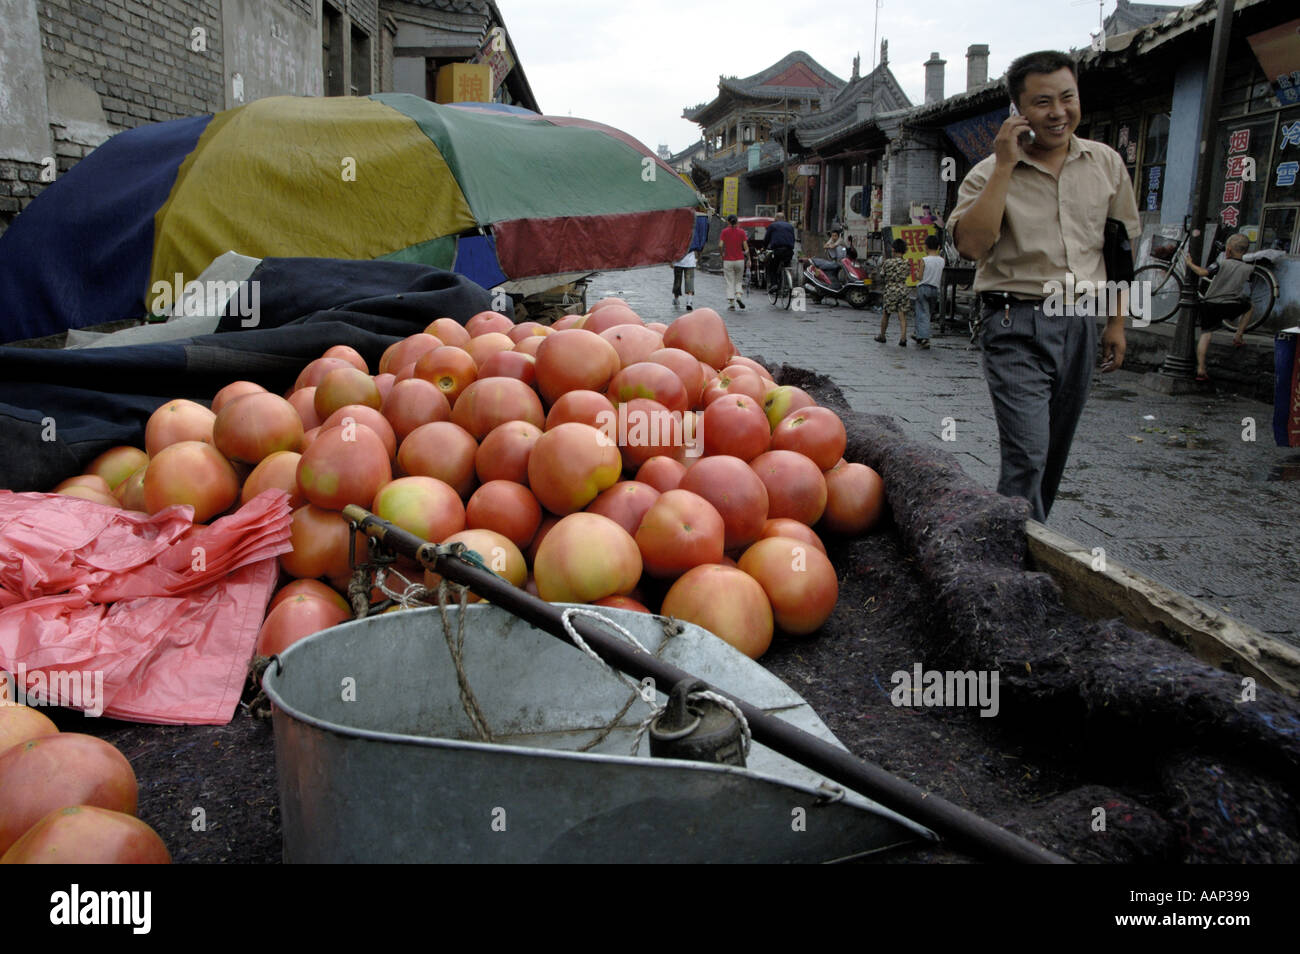 Tomatoes for sale at a street market in Datong, Shanxi, China. Stock Photo